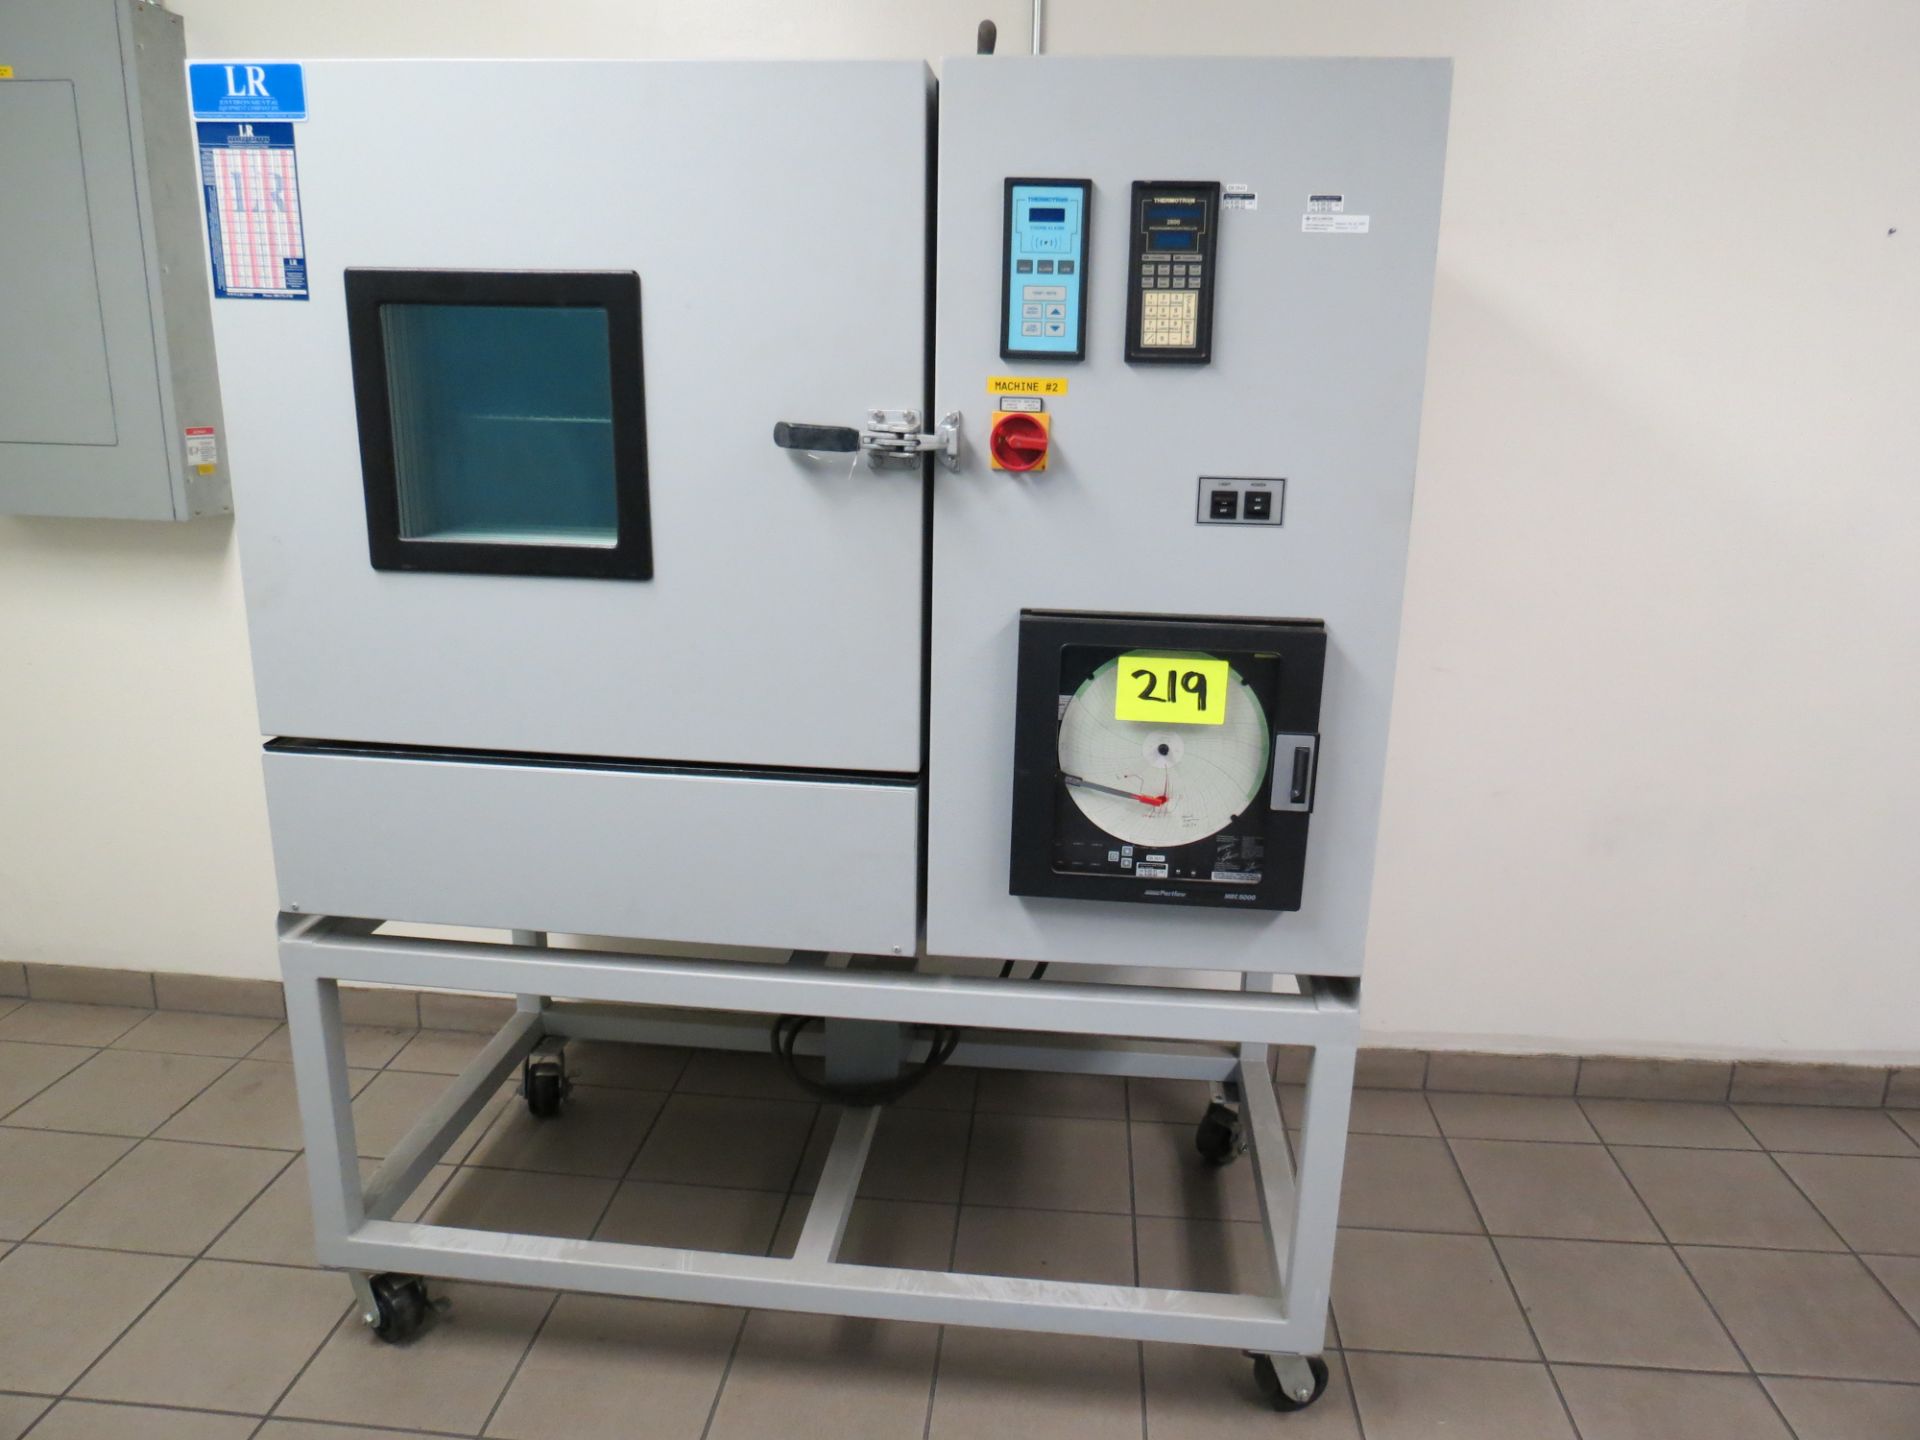 LR THERMOTRON MDL. S-5.5C ENVIRONMENTAL TEST CHAMBER, SN: 31955